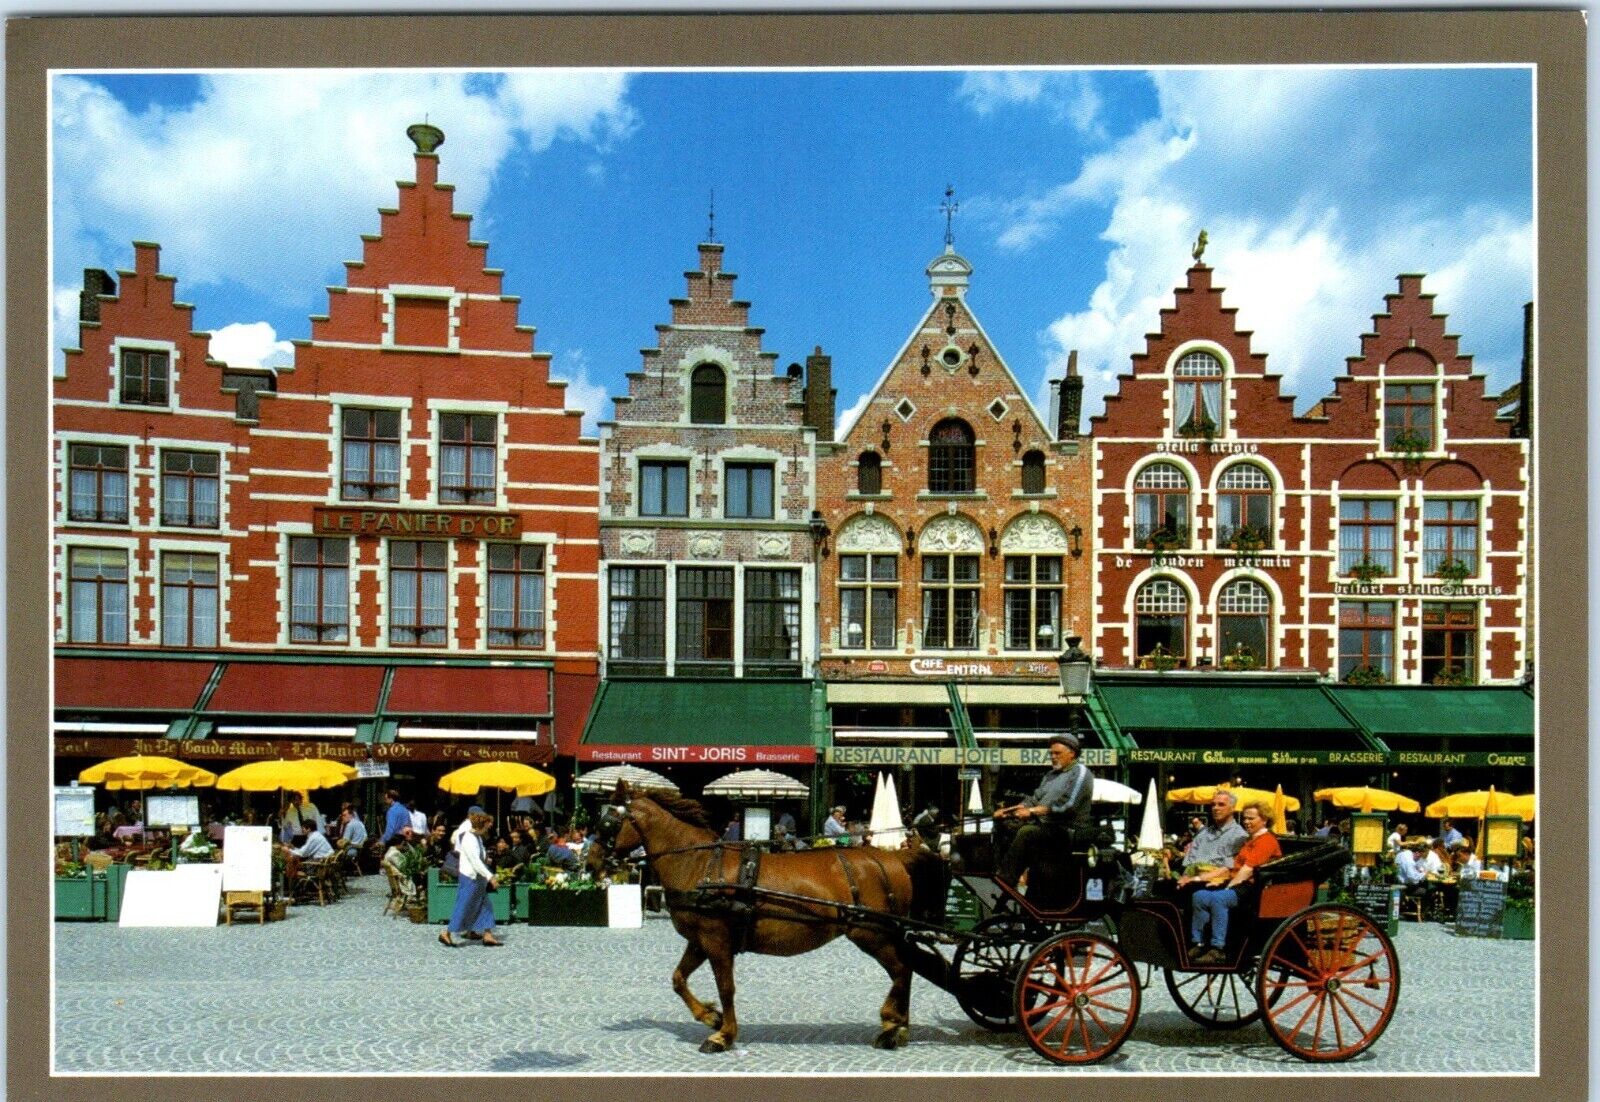 The Market Square, Horse and Buggy Ride Bruges, Belgium Postcard